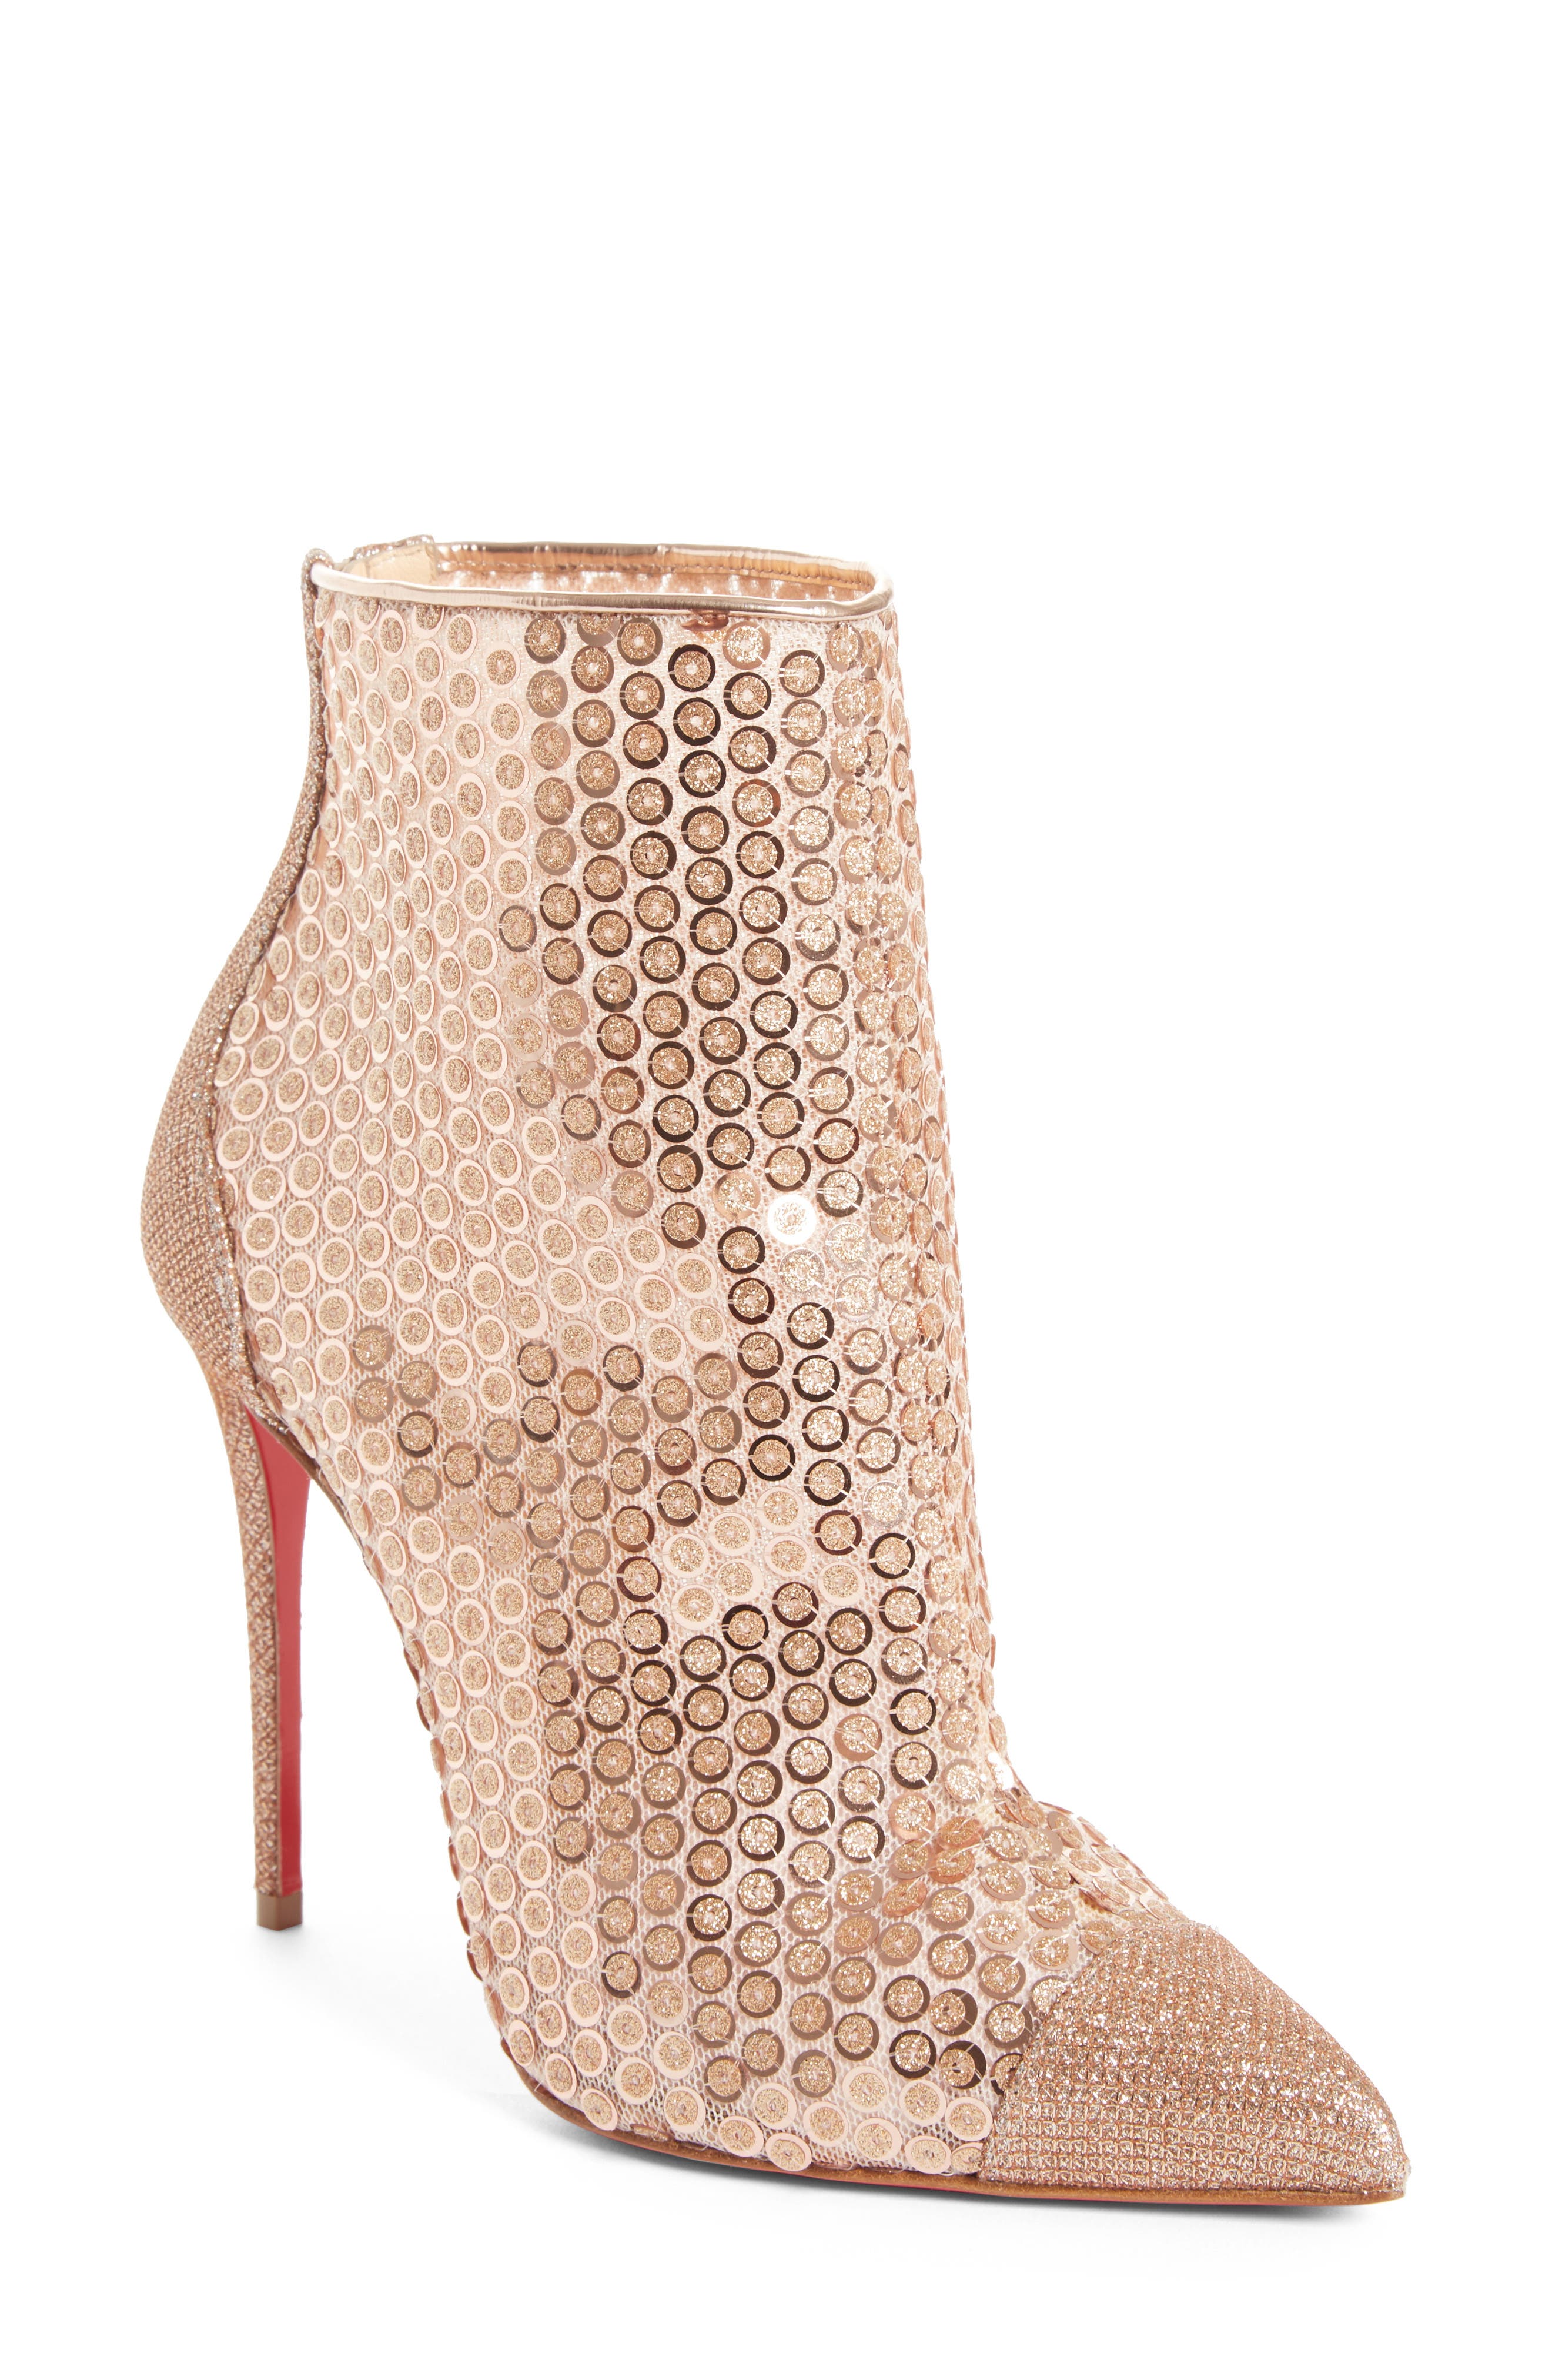 Christian Louboutin Gipsy Sequin Bootie 